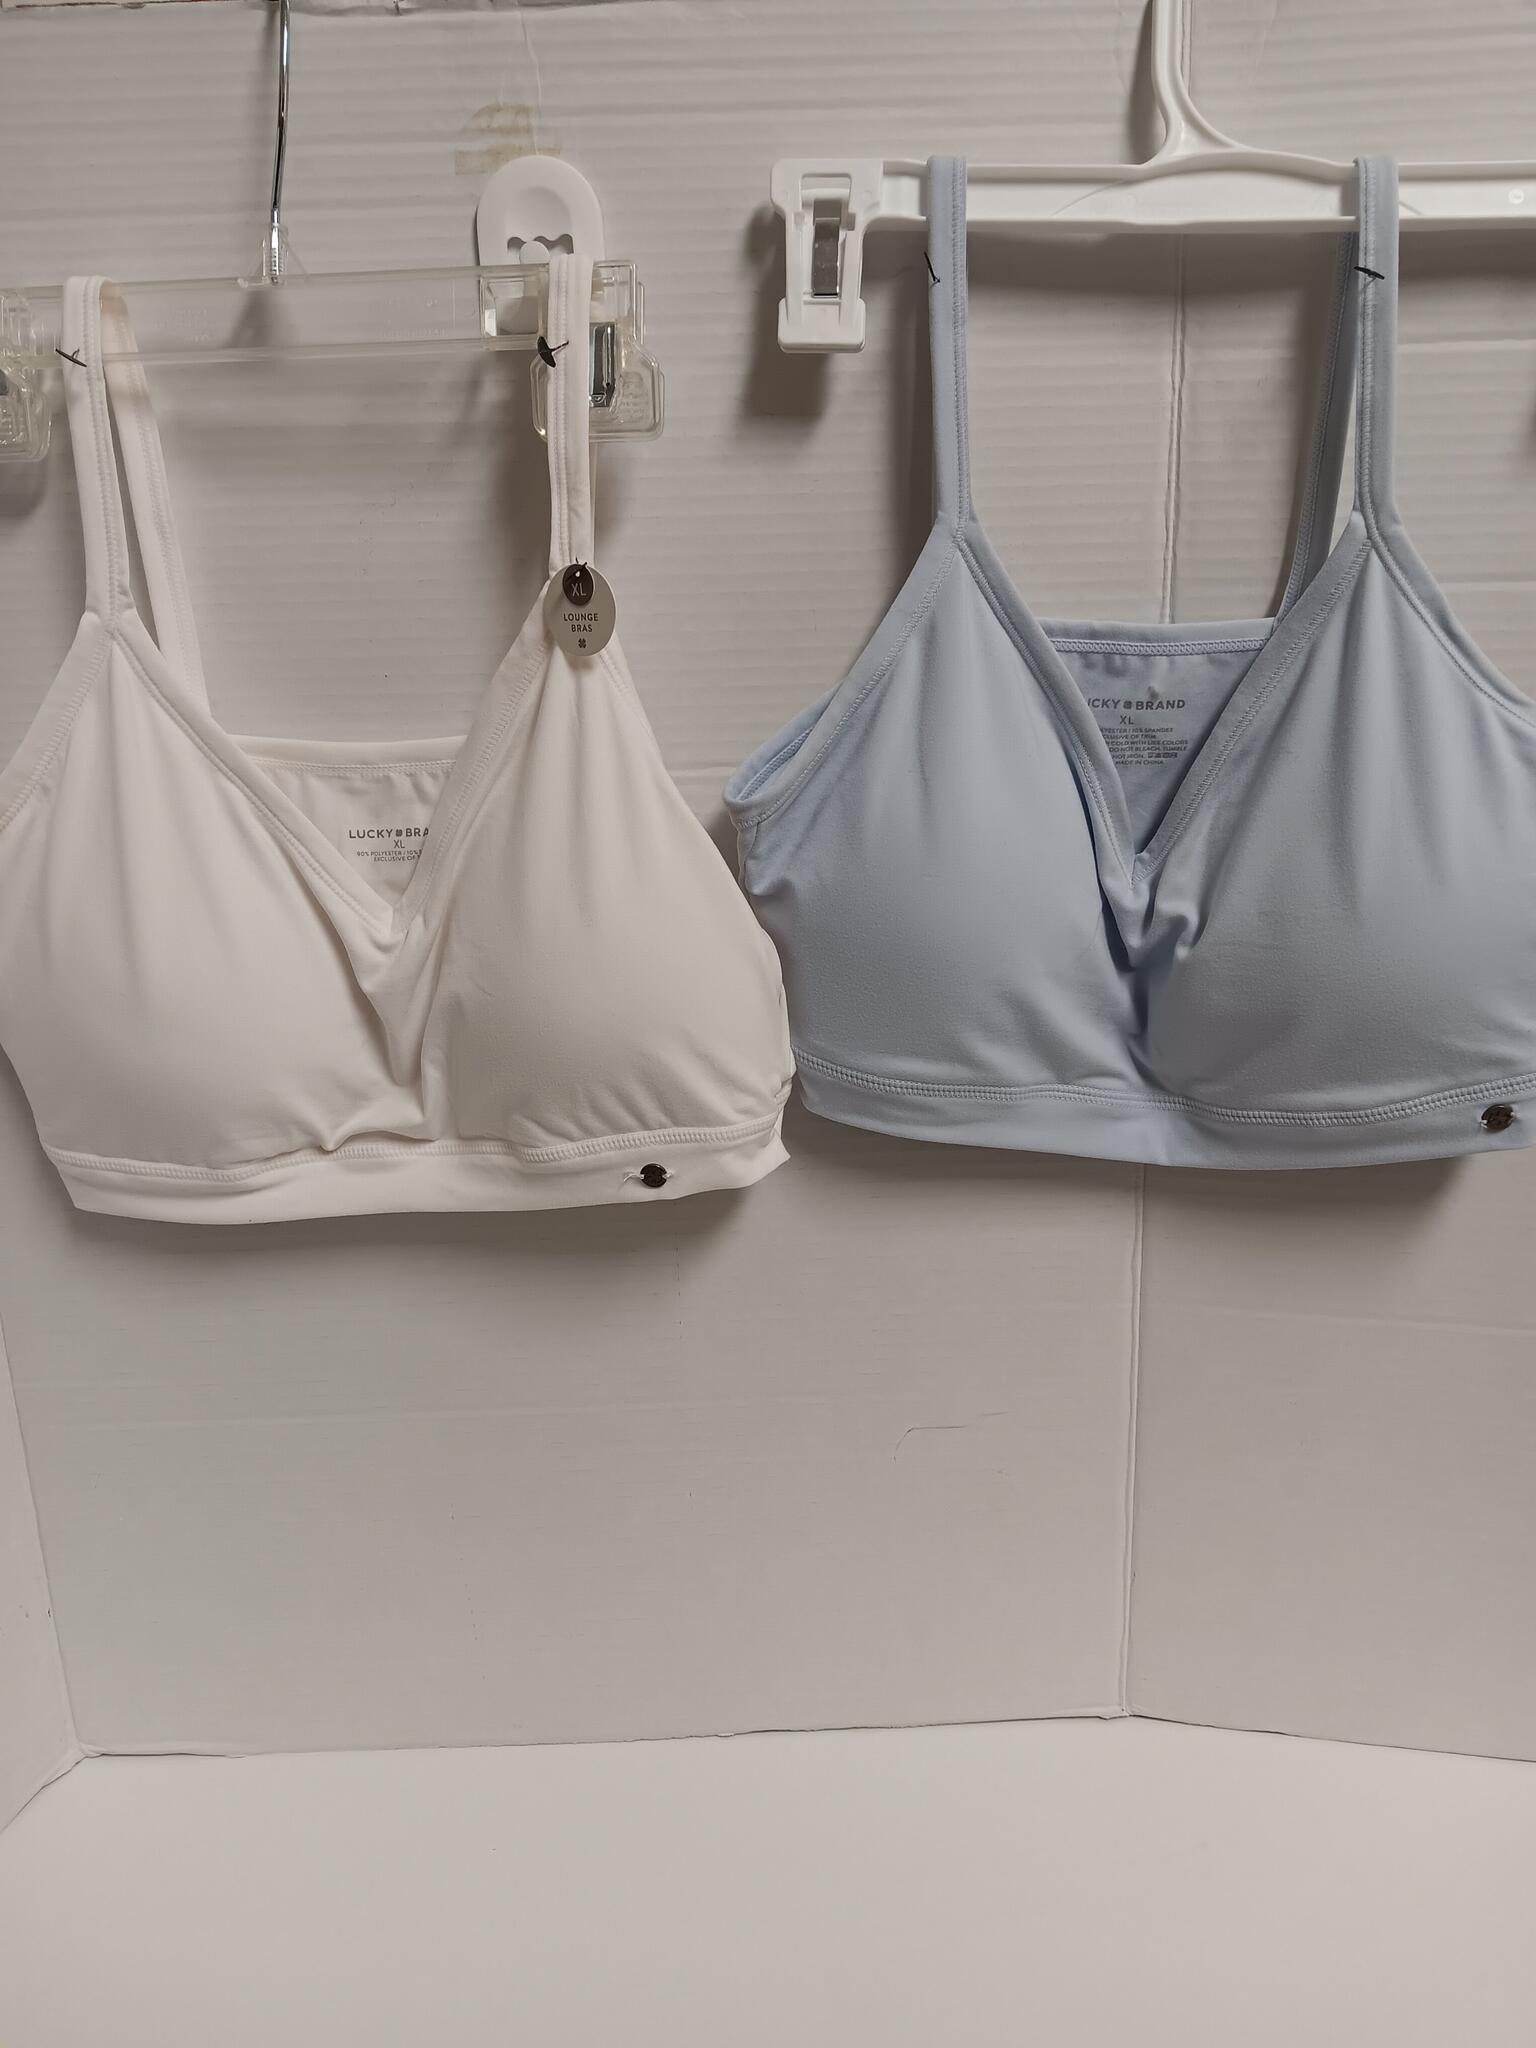 Lucky Brand Lounge Bras Ivory/Light Blue Size XL New (2 Pair) for $35 in  Augusta, GA